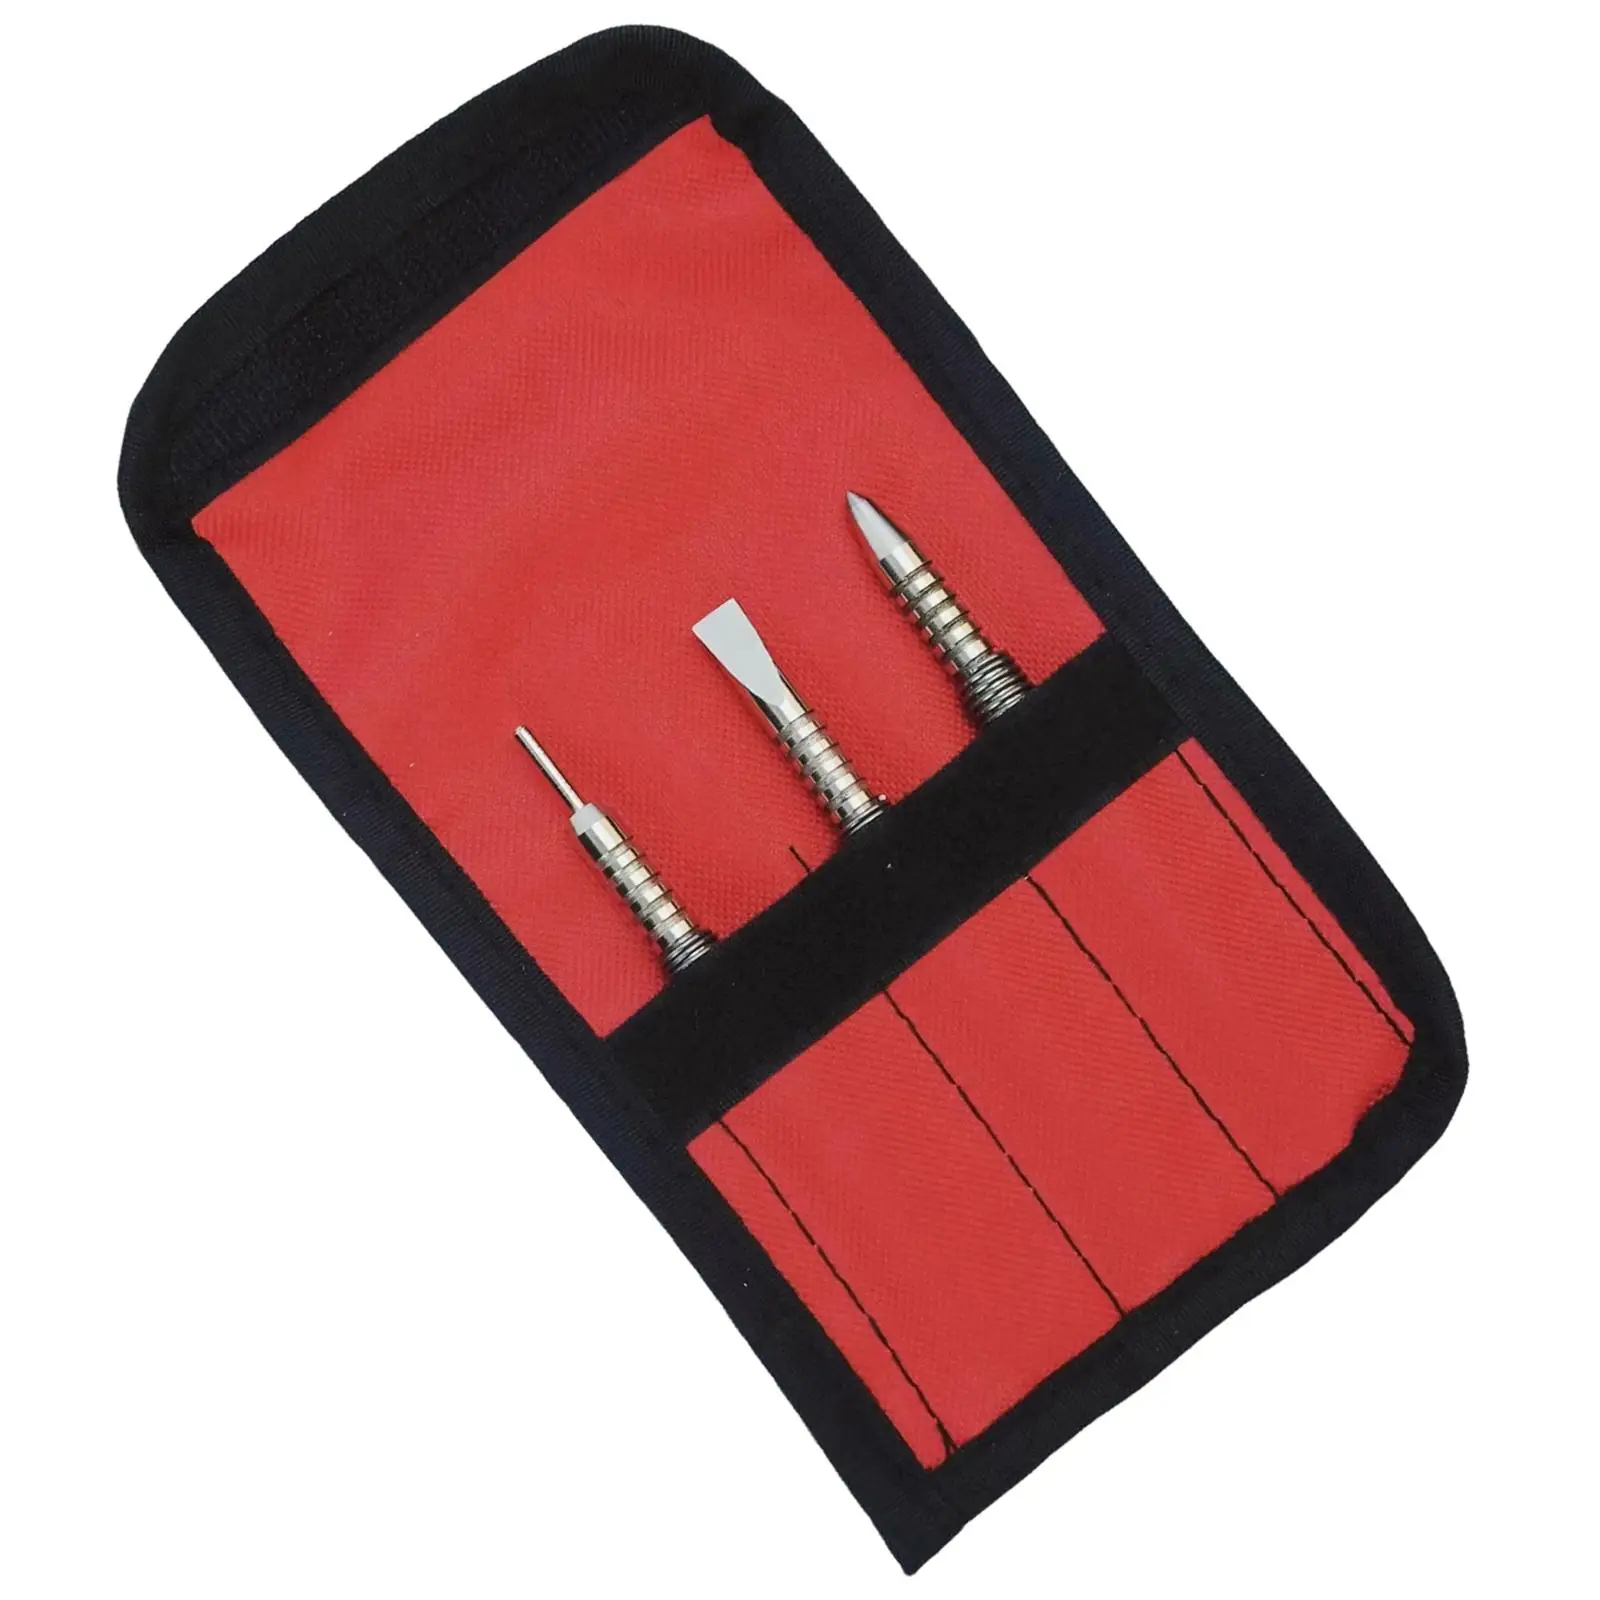 3x Hinge Pin Removerand Cold Chisel Center Punch Set with Storage Pouch Steel Hammerless Spring Punch Tool Set for Wood Working